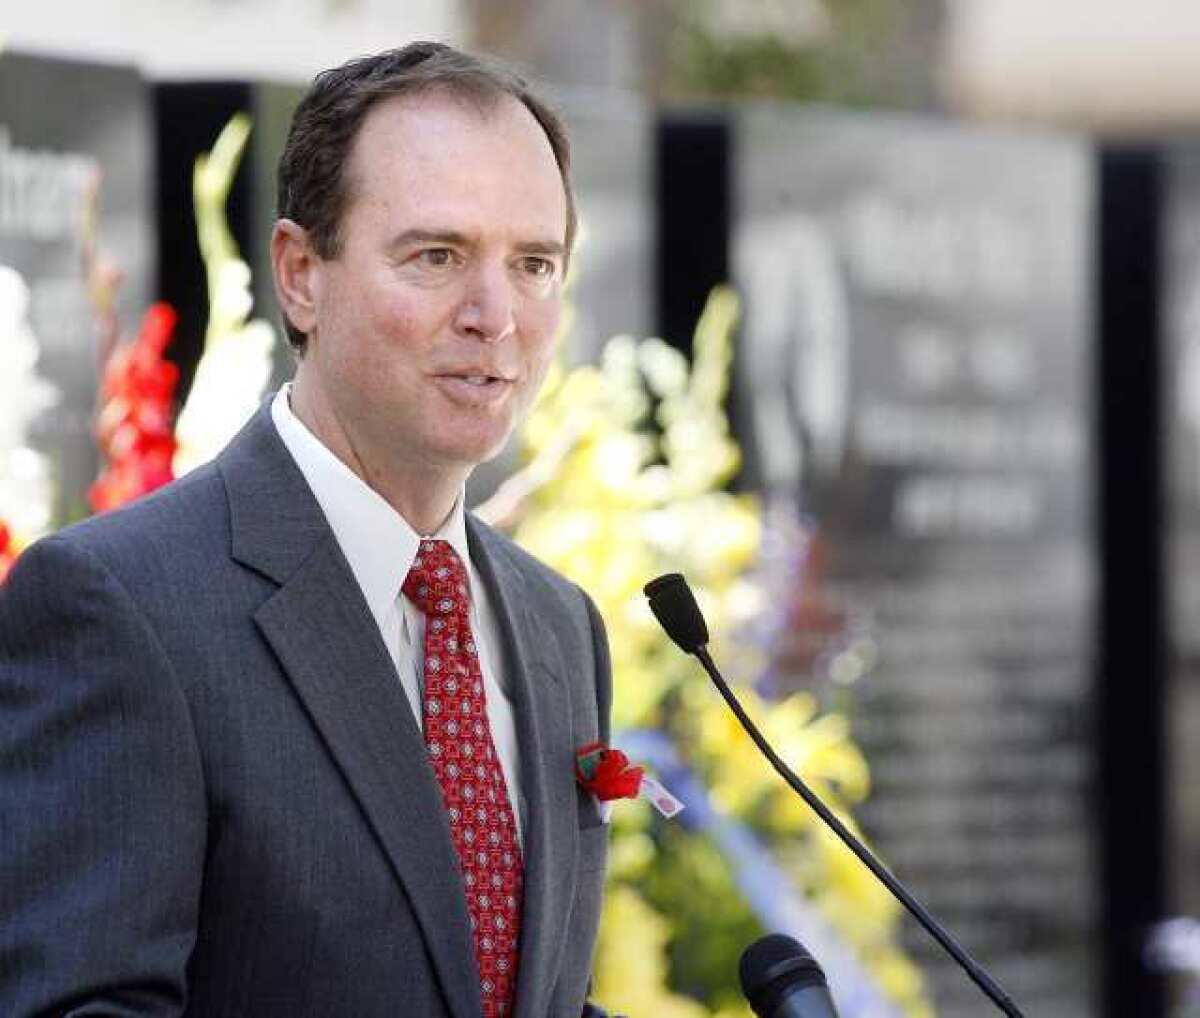 Rep. Adam Schiff (D-Burbank)said 'After Newtown, I believe our nation has reached a tipping point on the issue of gun violence.'